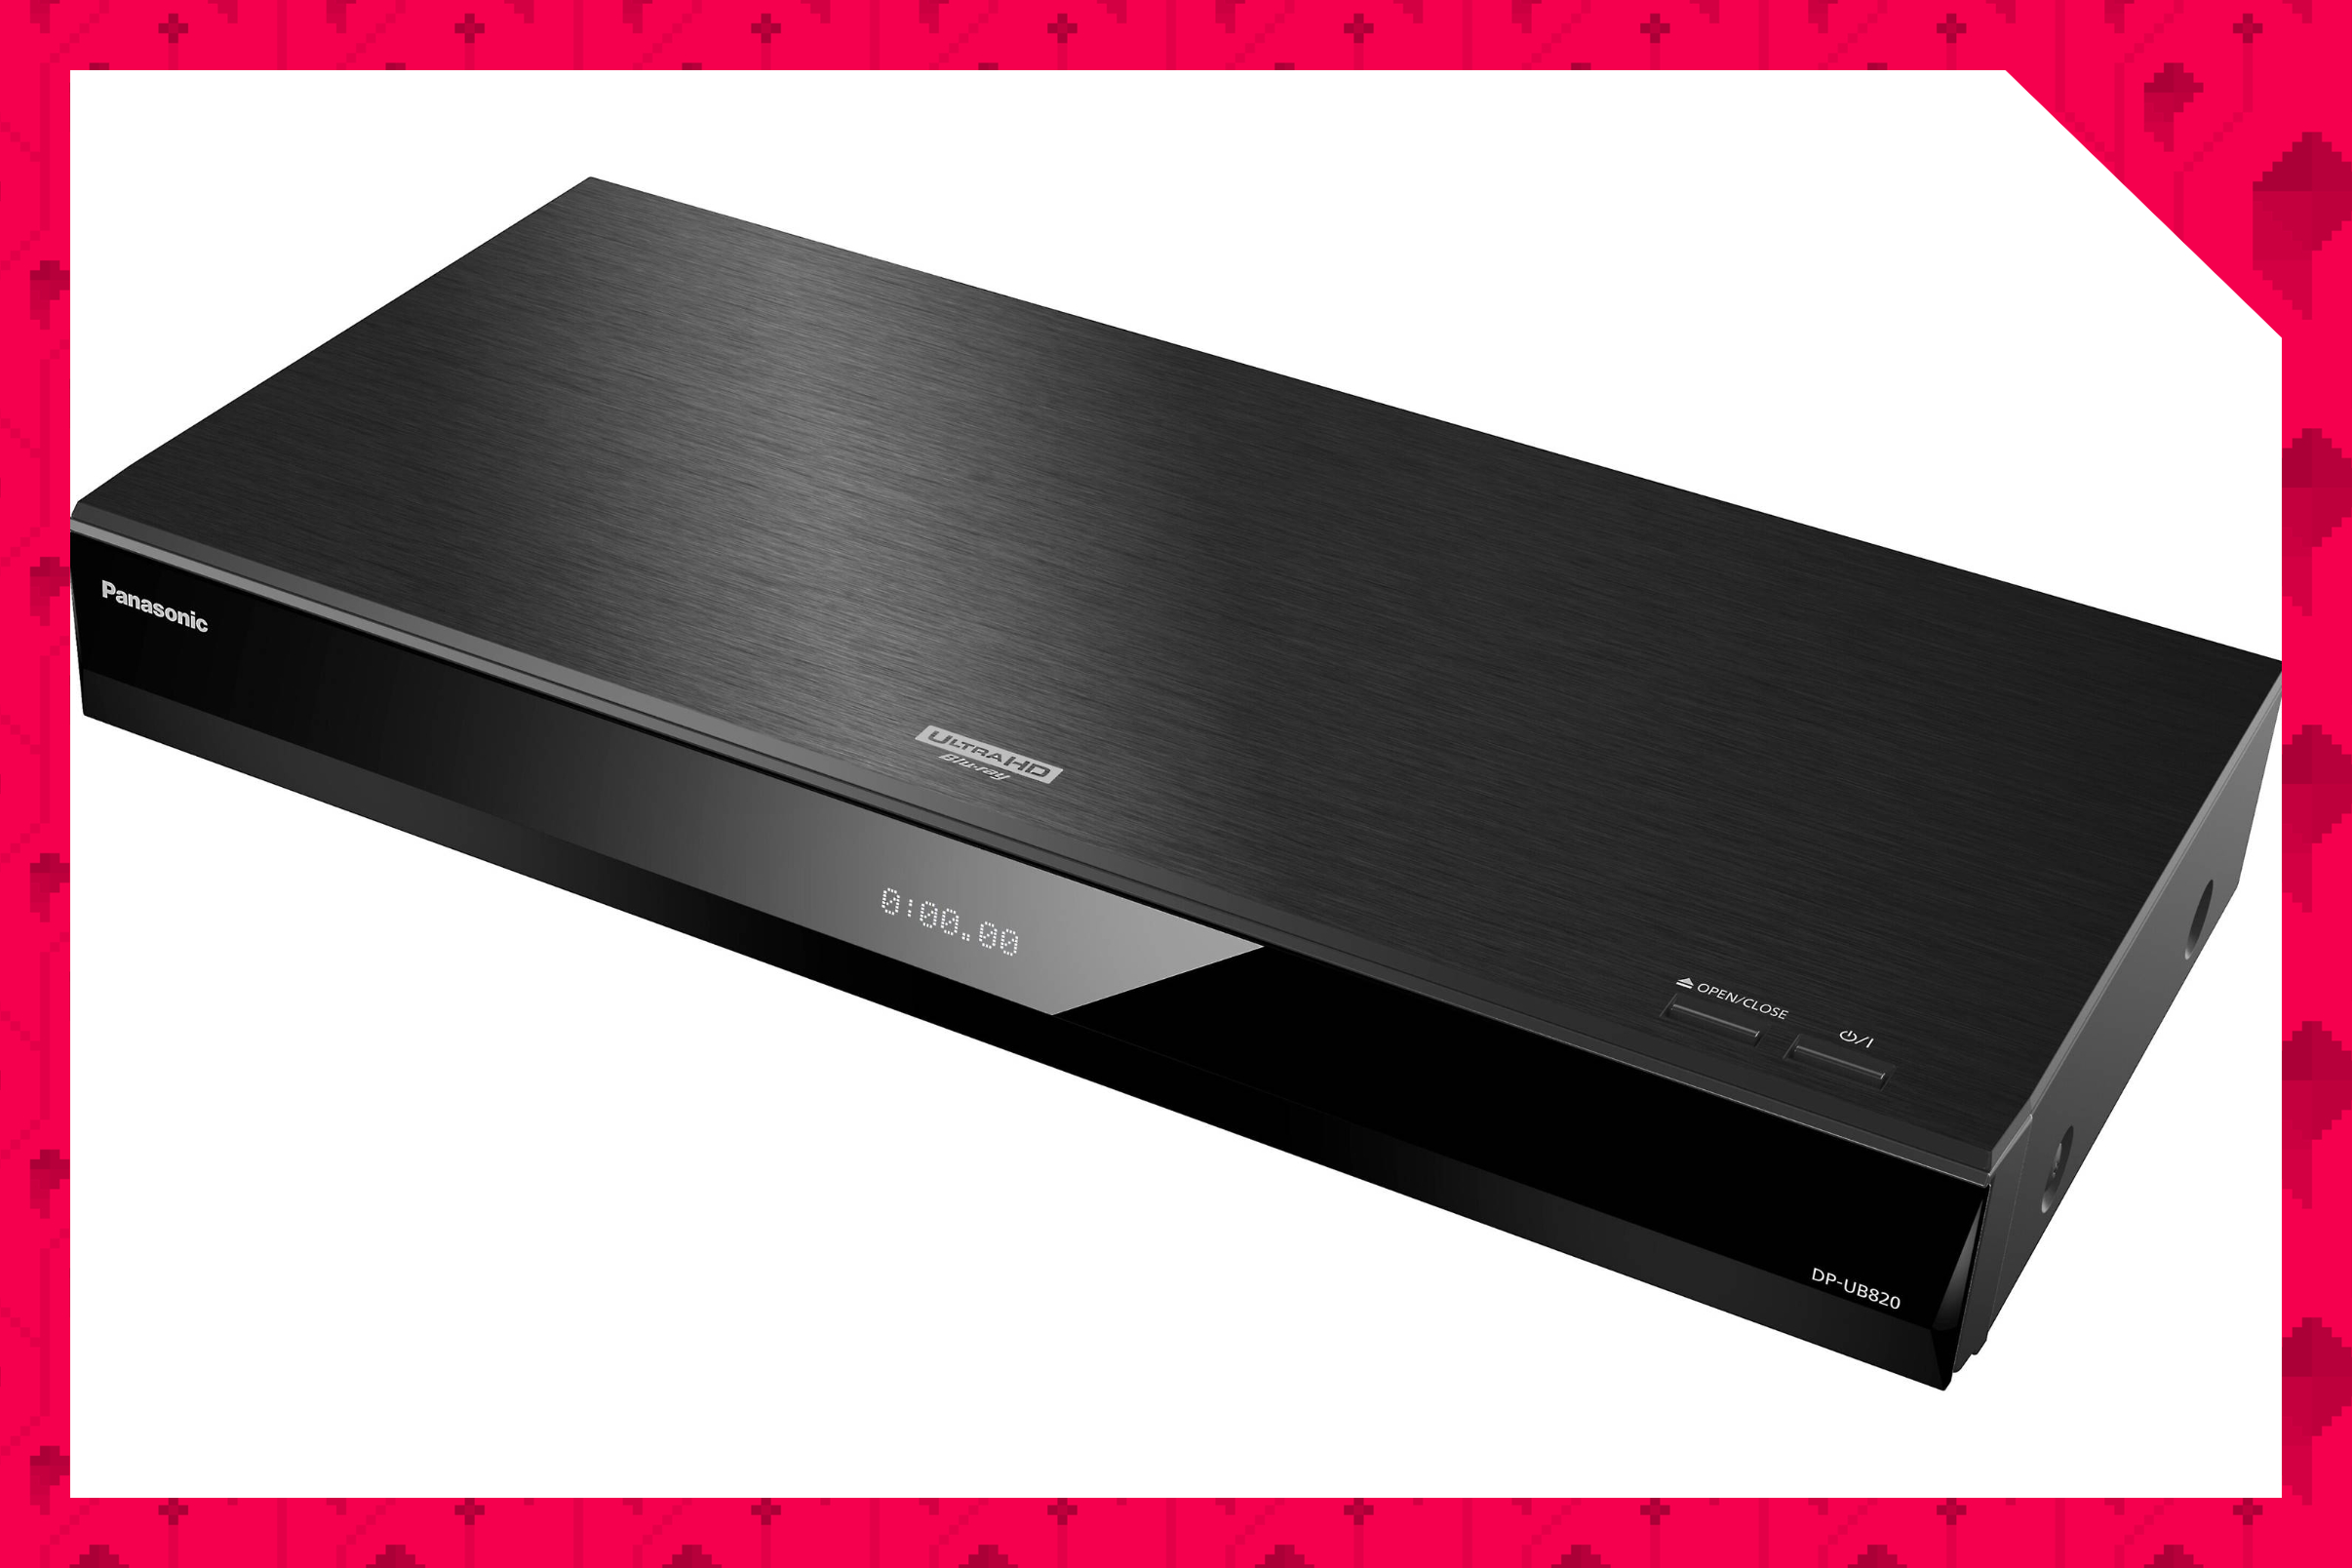 A photo of the Panasonic DP-UB820 4K Blu-ray player wrapped in pink Polygon logos.